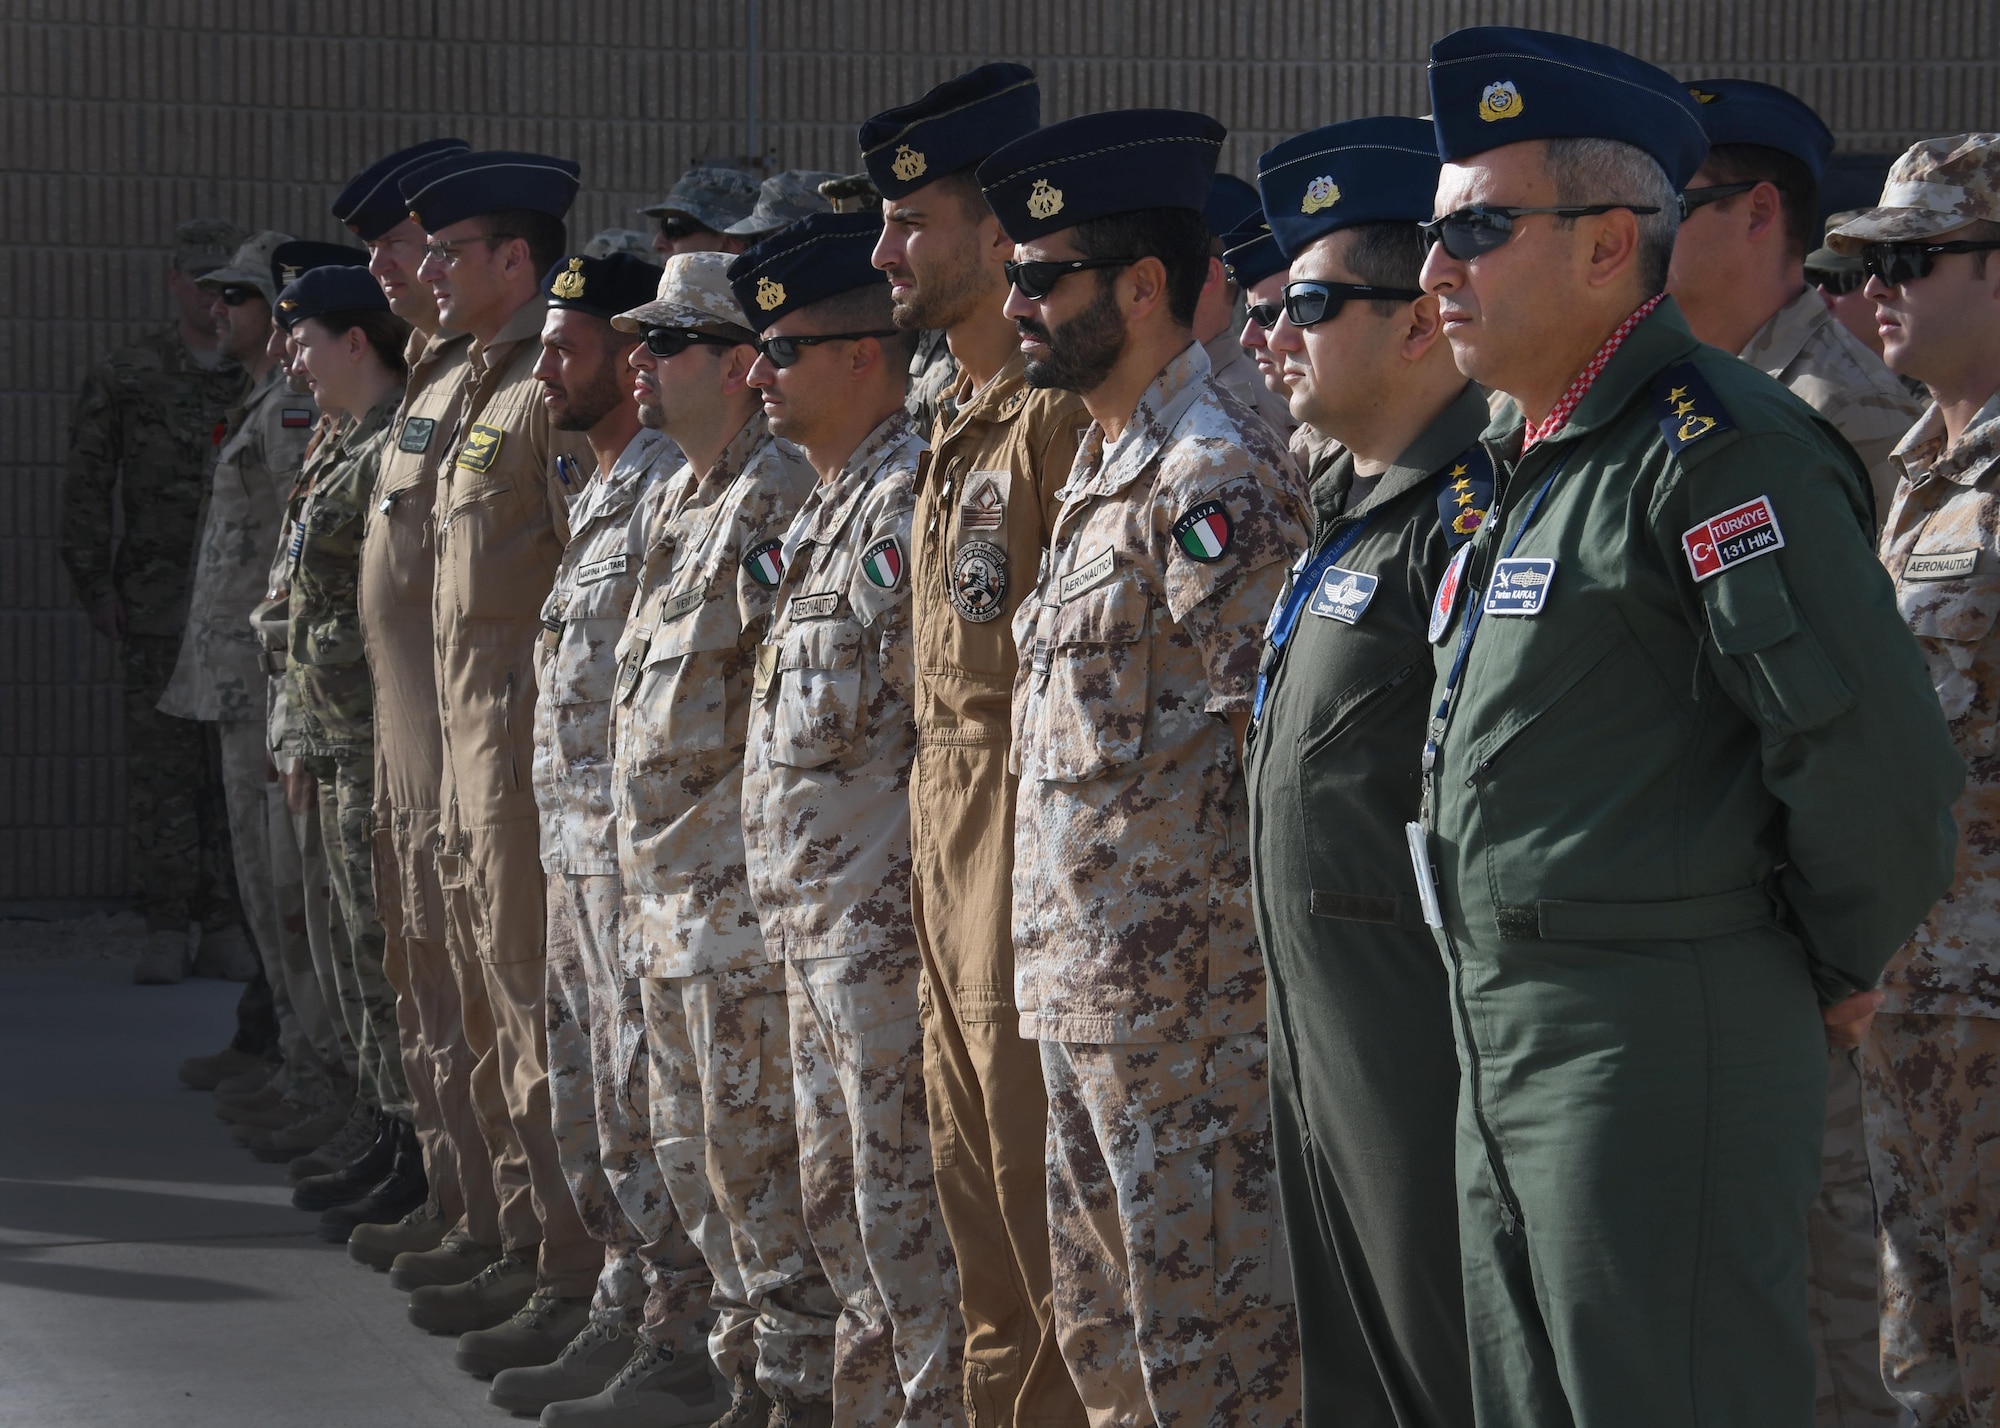 Members of the Italian Detachment at the Combined Air Operations Center stand in formation at Al Udeid Air Base, Qatar, Nov. 4, 2016. The Italian detachment, as well as distinguished guests from all over Al Udeid Air Base, gathered at the Memorial Plaza in recognition of Italian Armed Forces Day. (U.S. Air Force Photo by Senior Airman Miles Wilson)